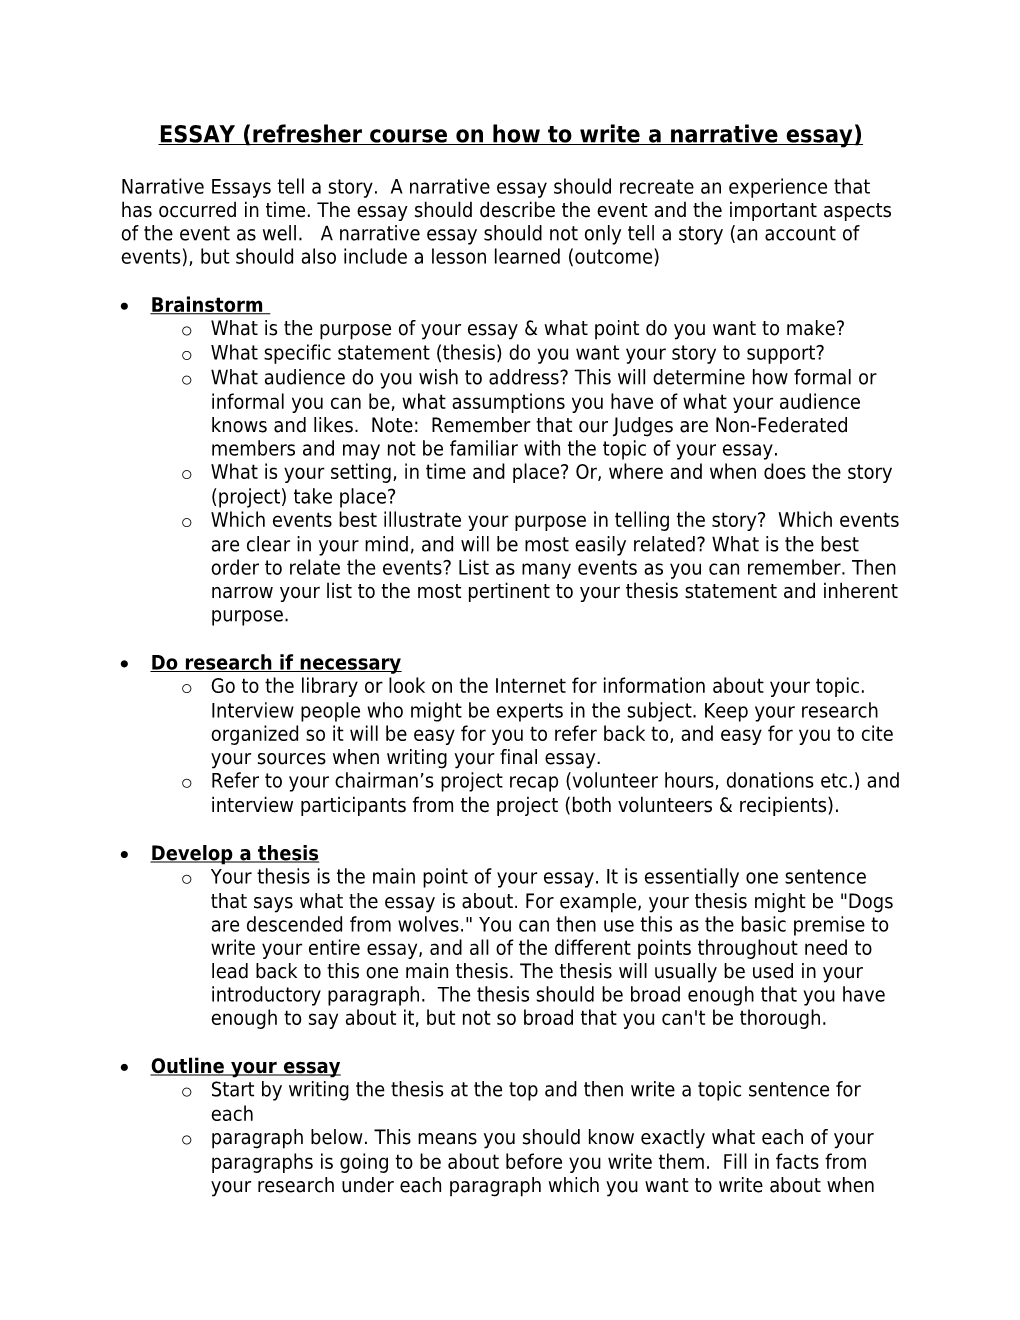 ESSAY (Refresher Course on How to Write a Narrative Essay)